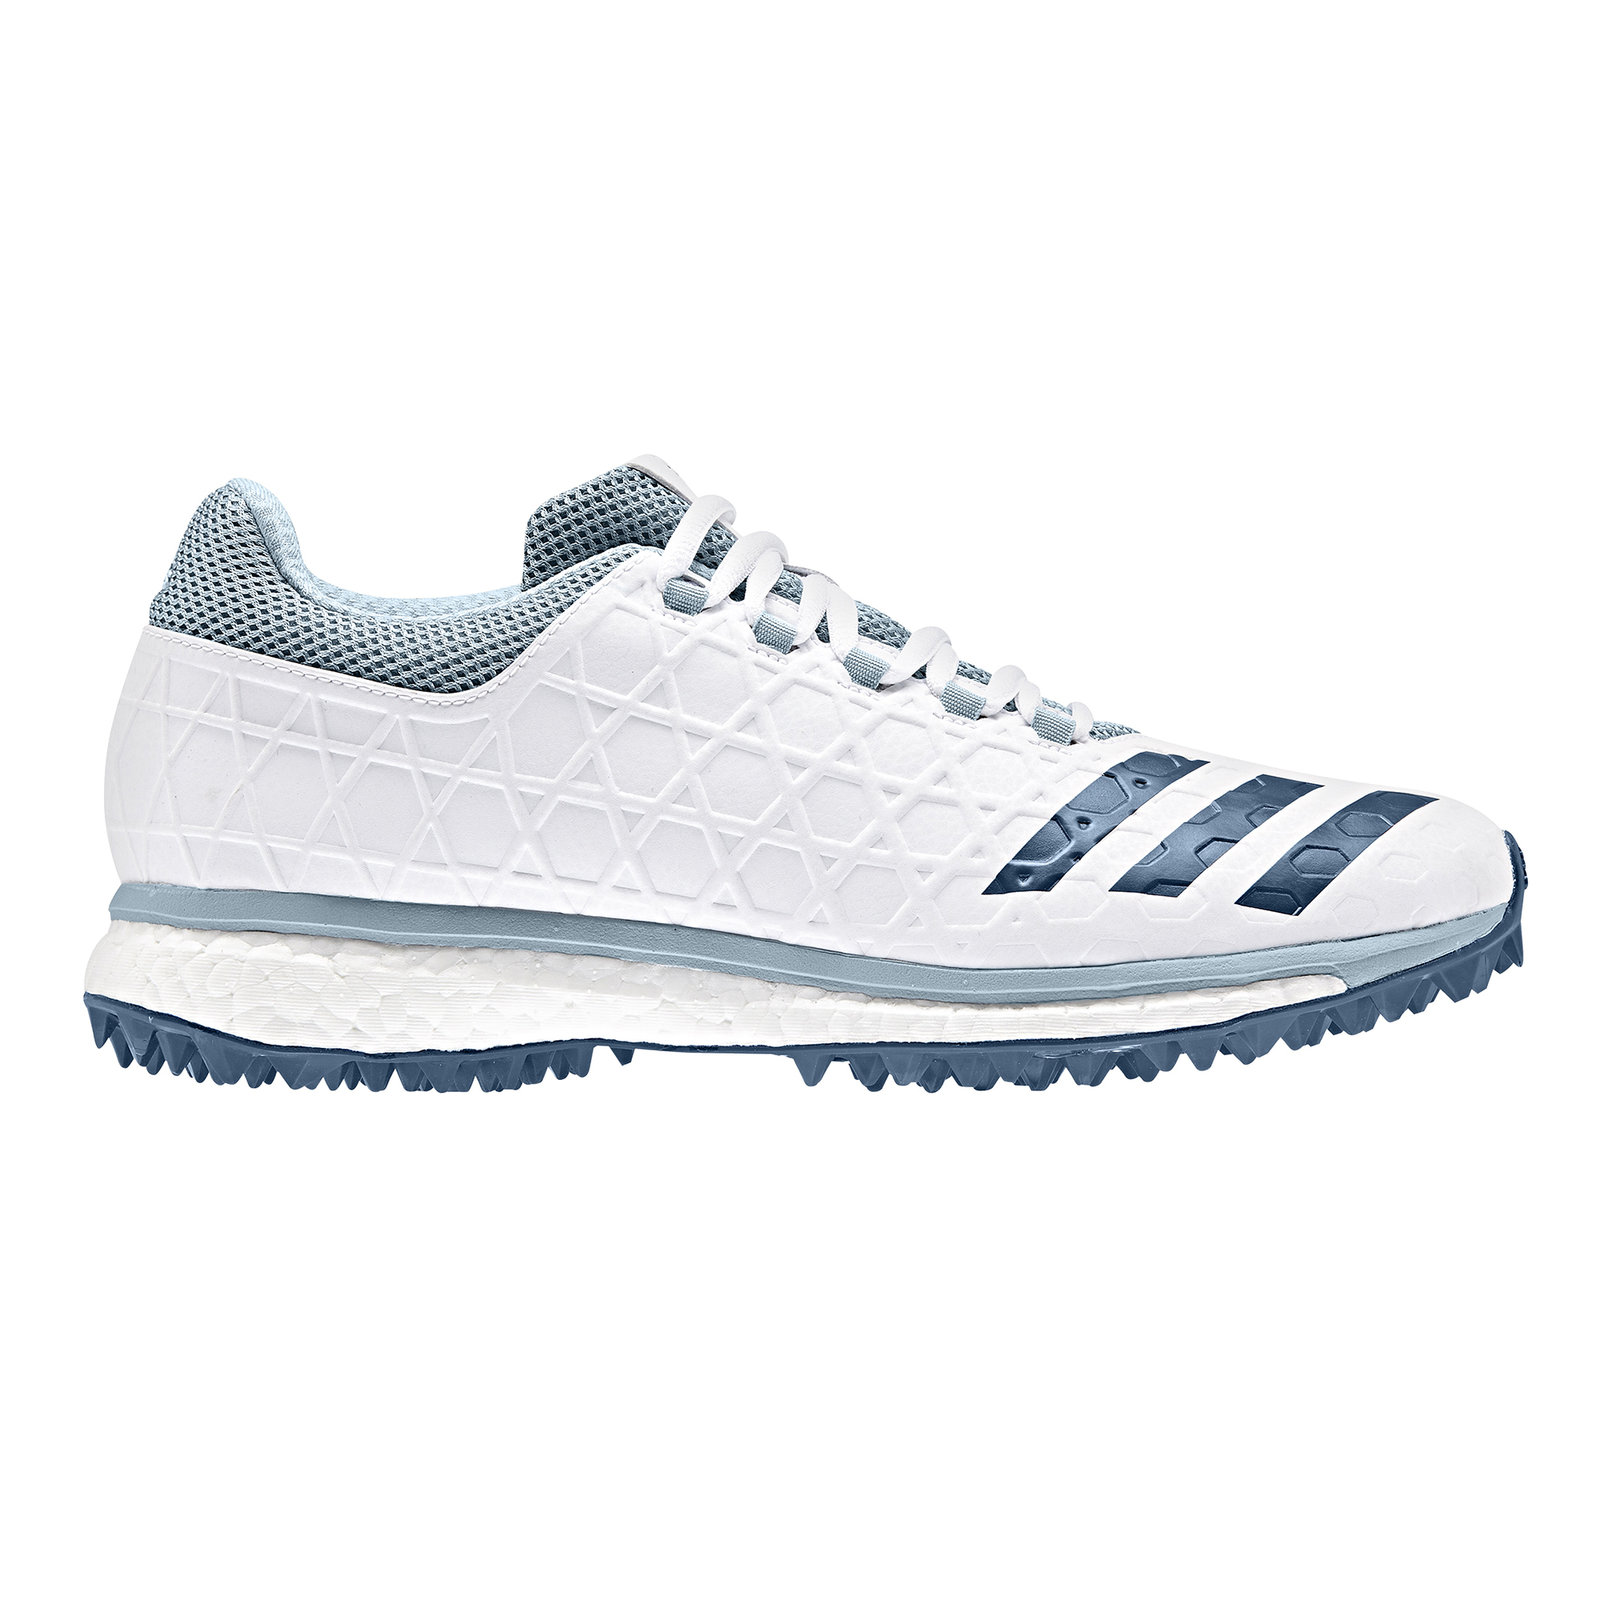 adidas boost cricket shoes